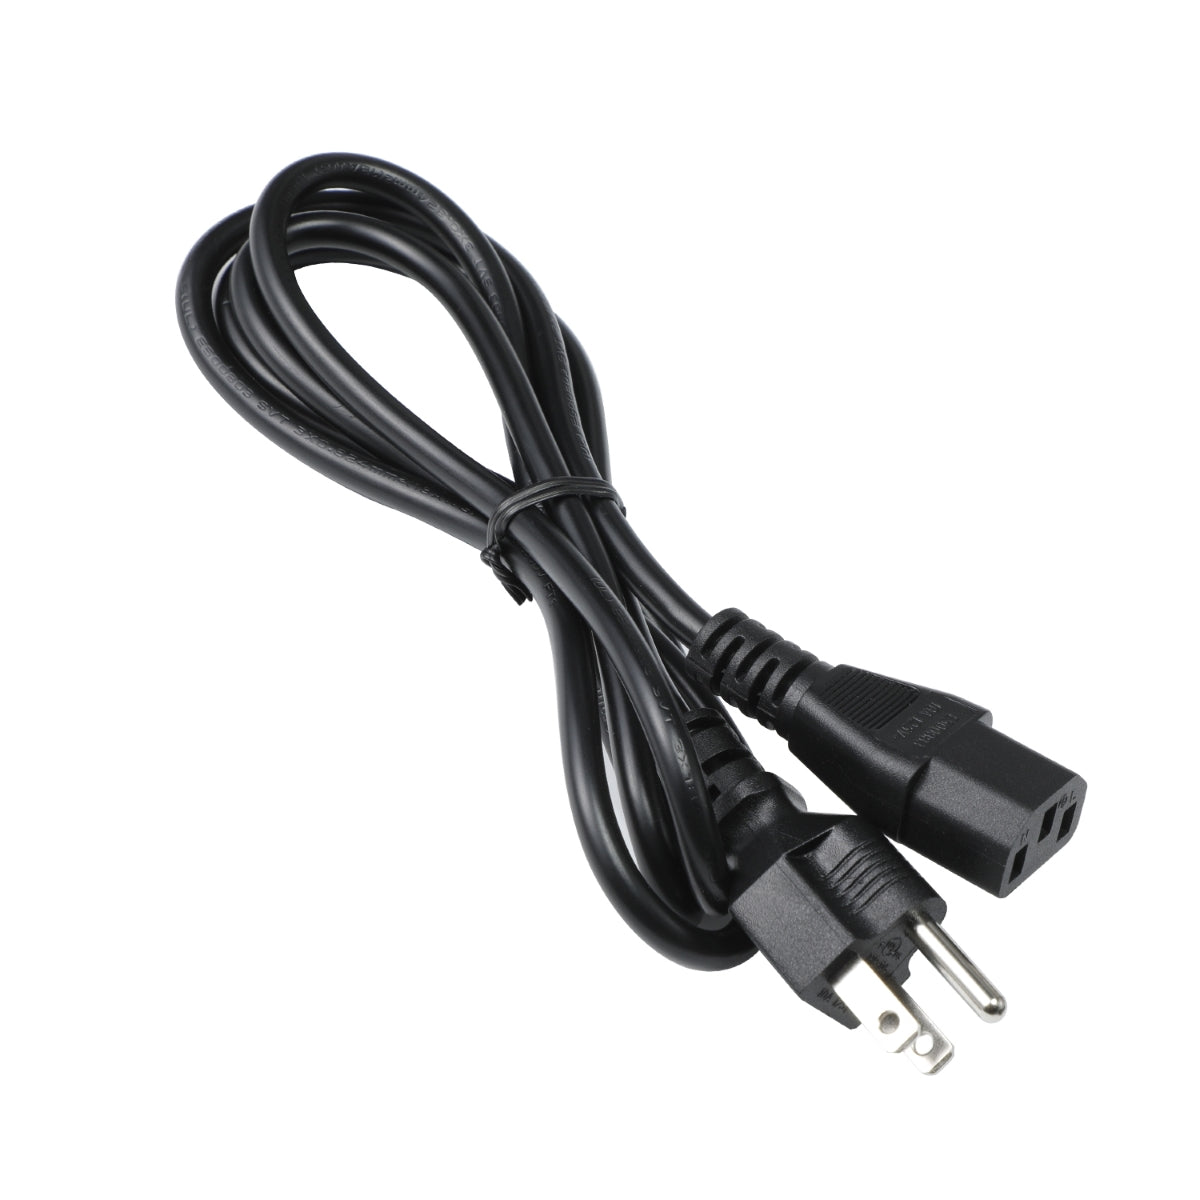 Power Cord for LG 27MD5KL-B Monitor.